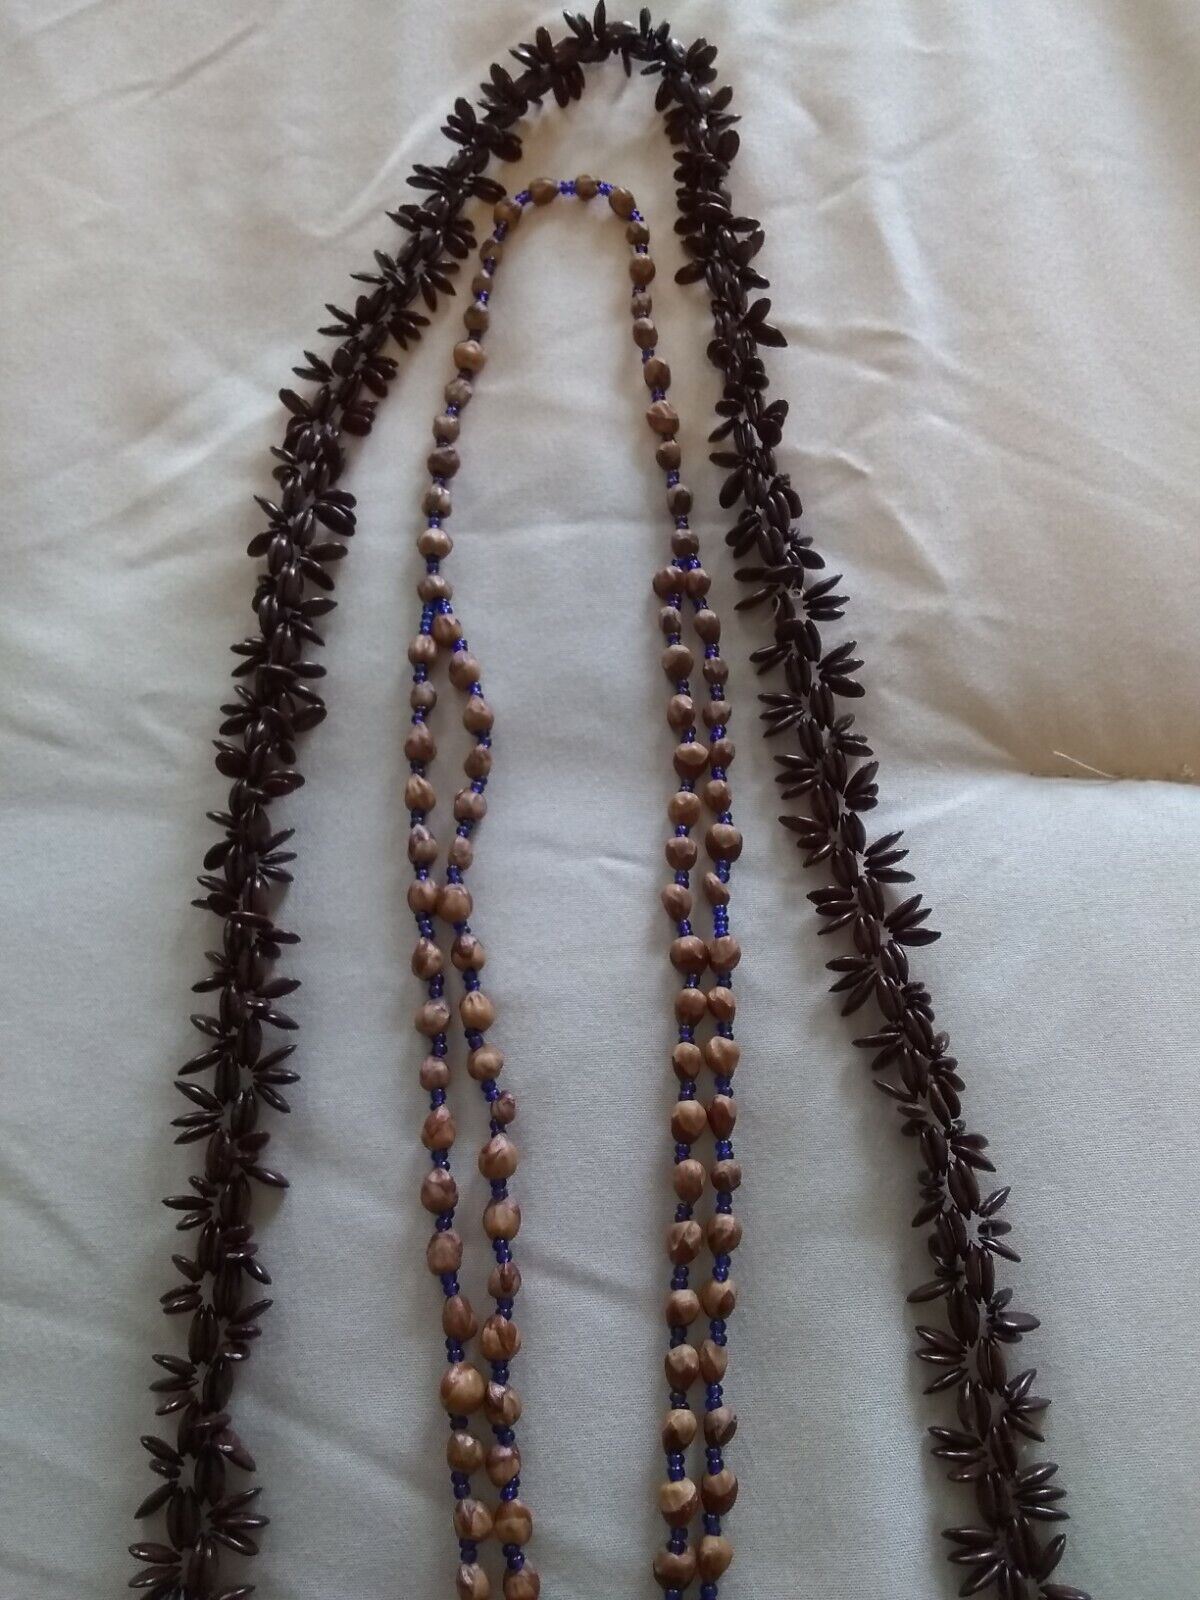 2 VINTAGE Seed/Bead Boho 70s Necklaces - image 4